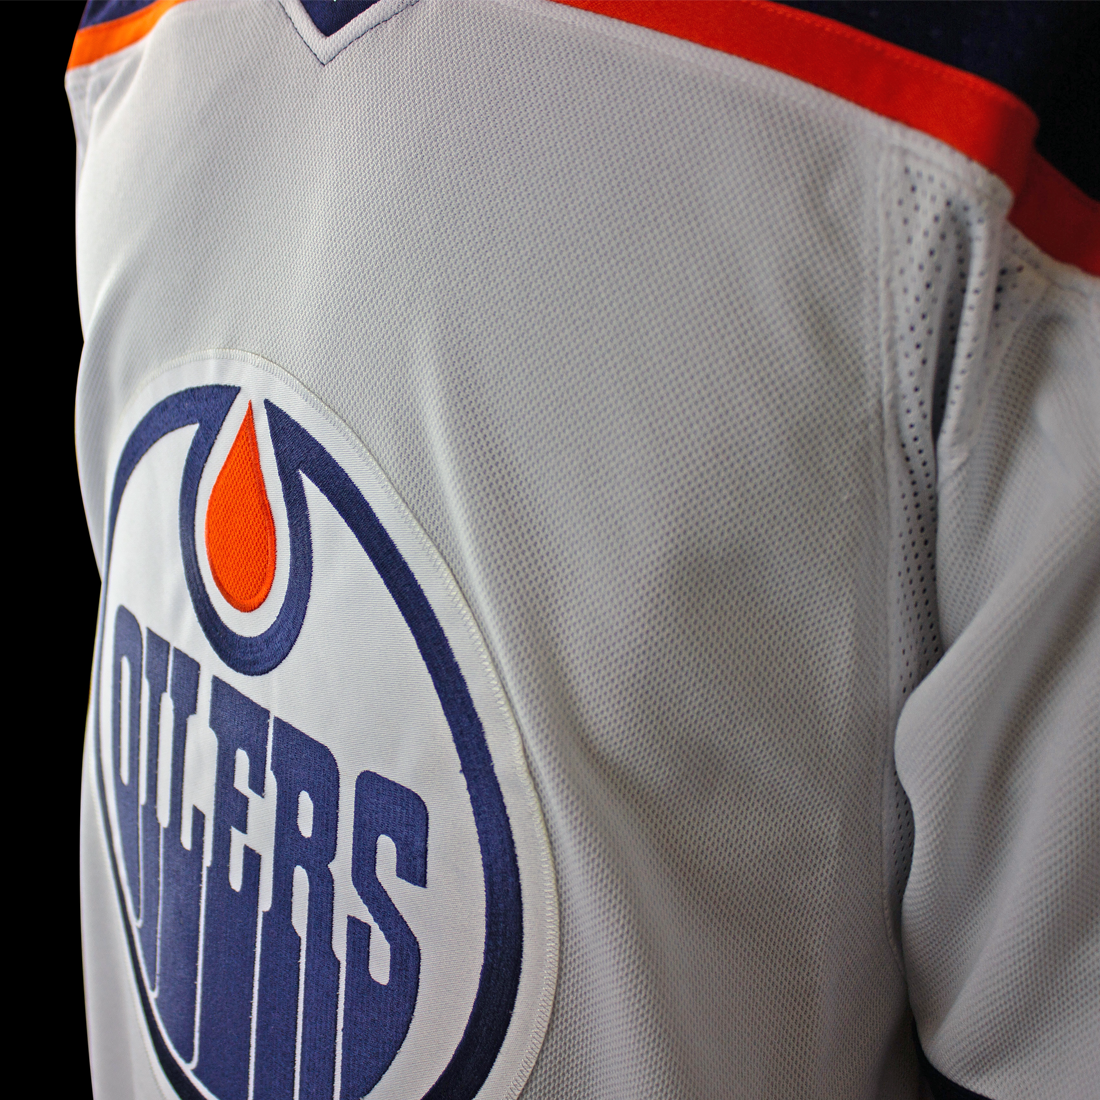 Oilers' Bear to honour Indigenous heritage with name bar in Cree